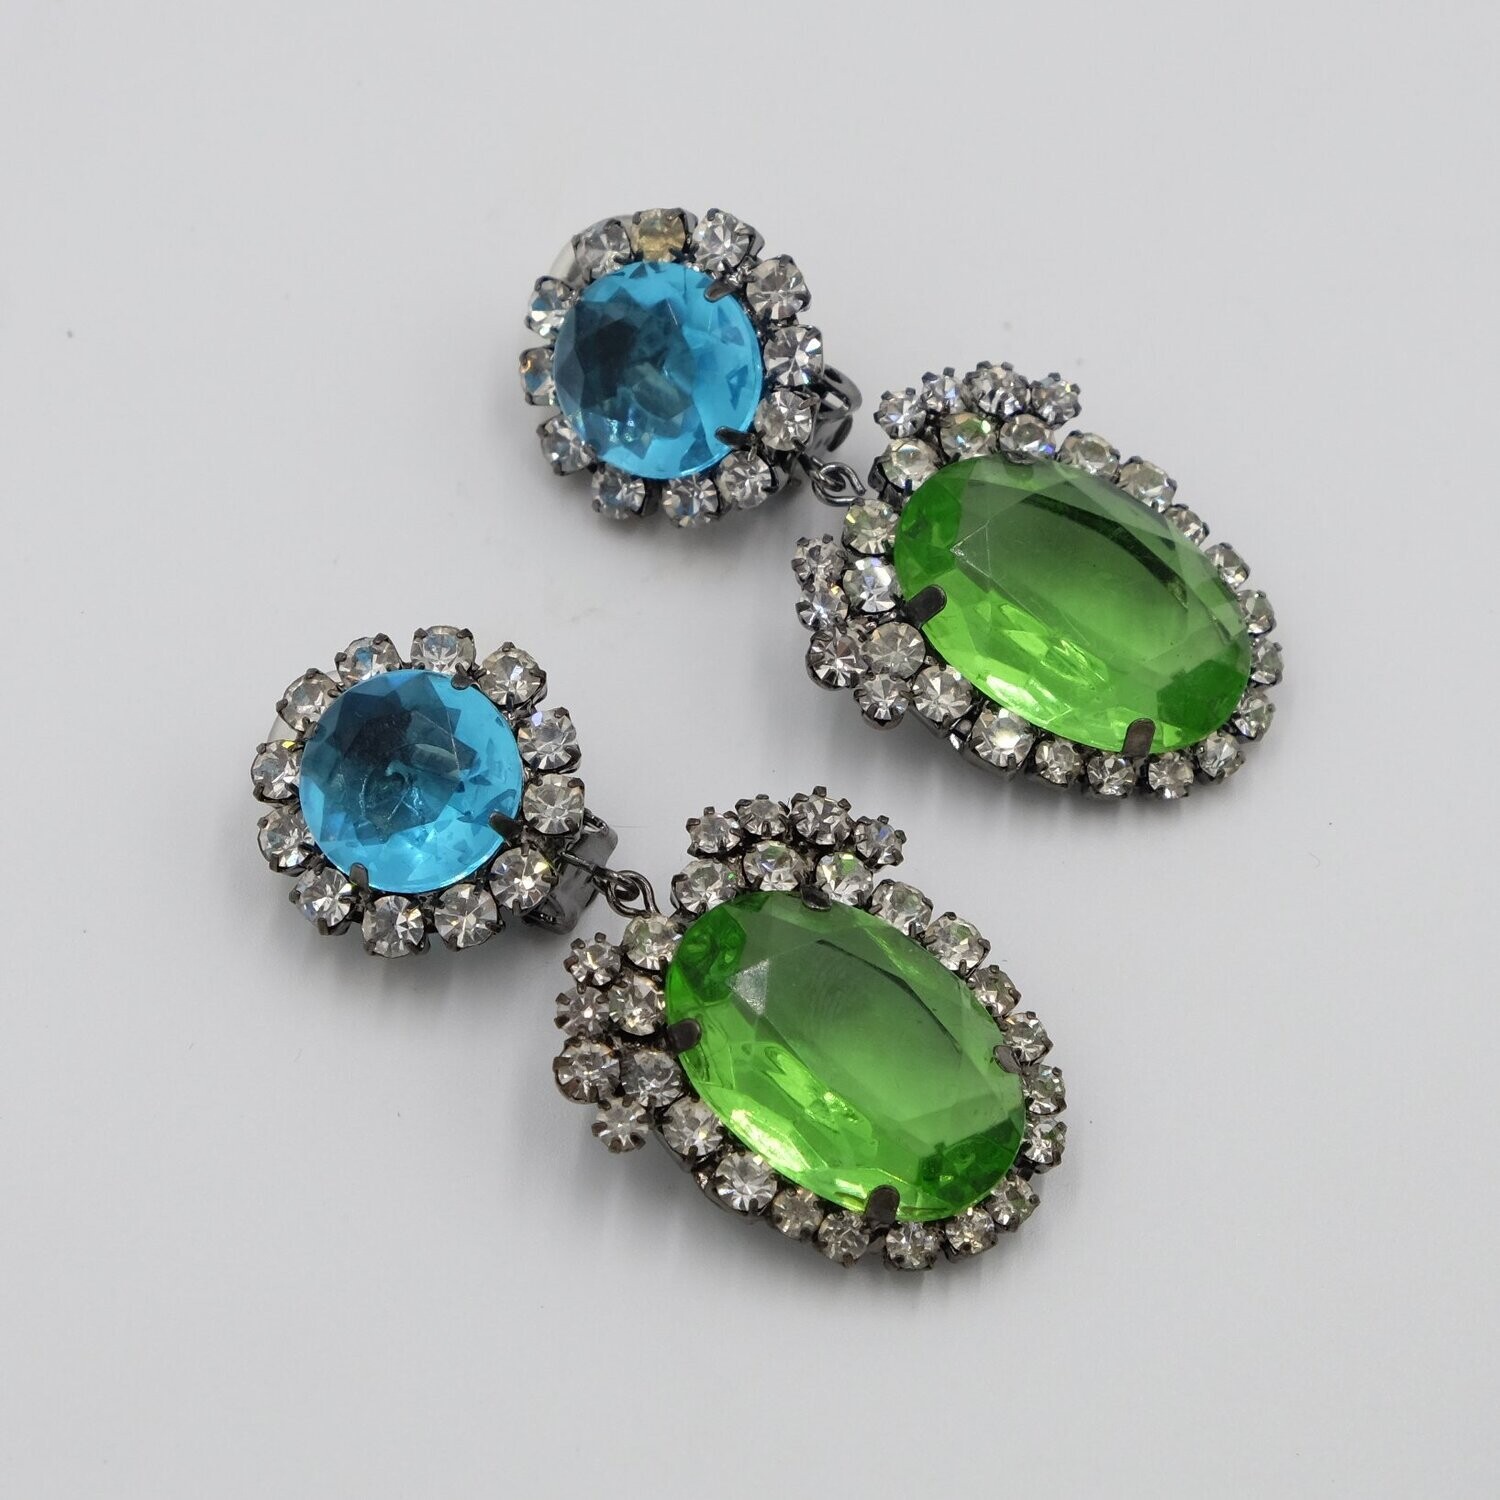 Kenneth Jay Lane Green and Blue Crystal Earrings 1980's